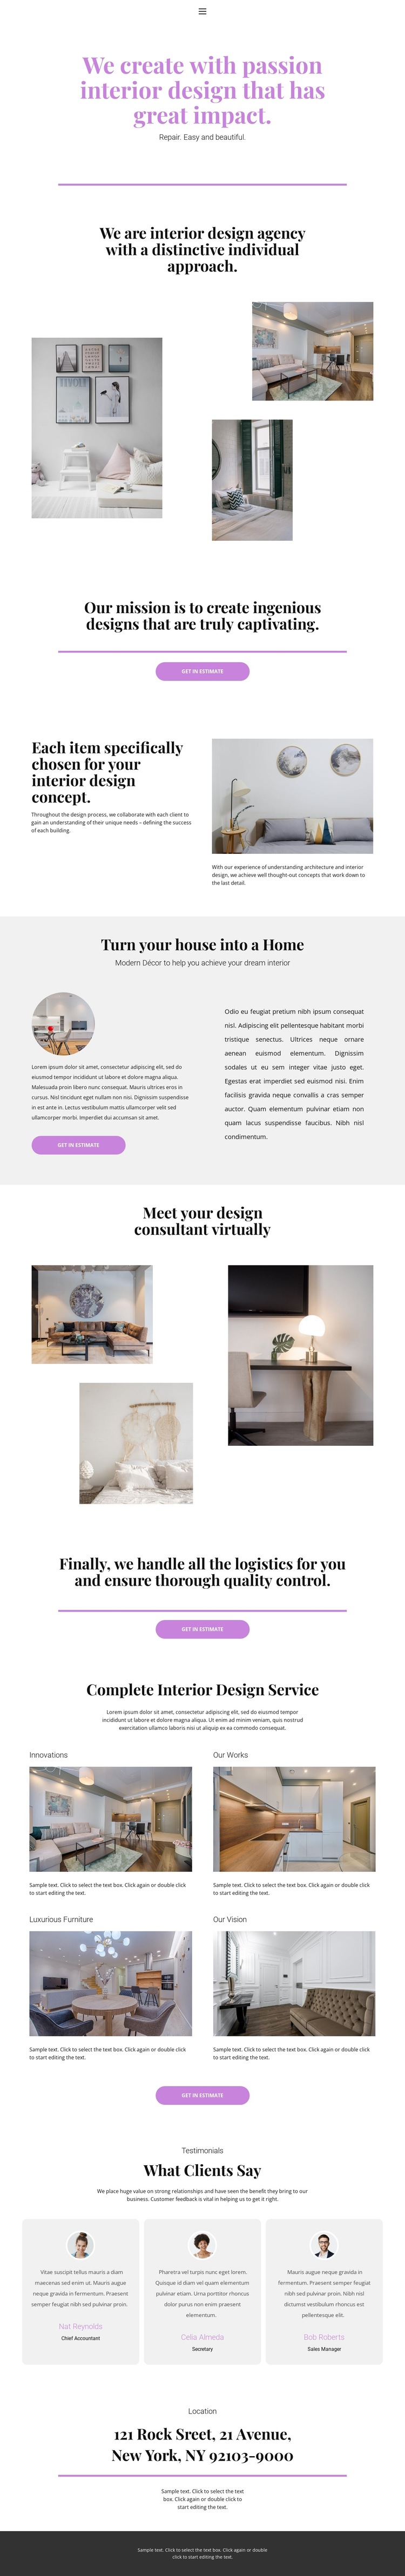 Choice of design for the house HTML5 Template